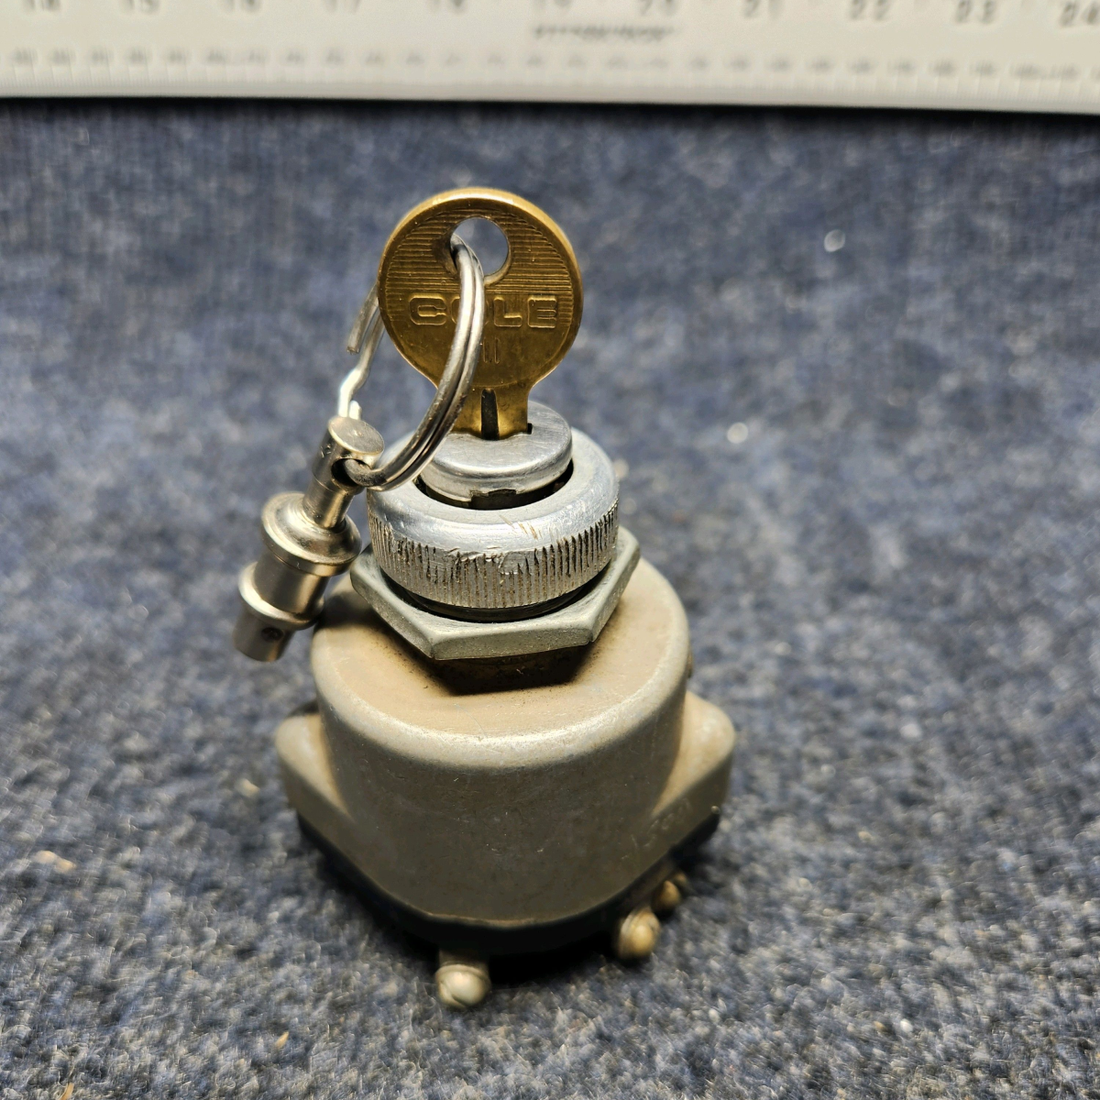 Used aircraft parts for sale, 0-357200-1 BEECHCRAFT F35 BENDIX IGNITION SWITCH W/ KEY